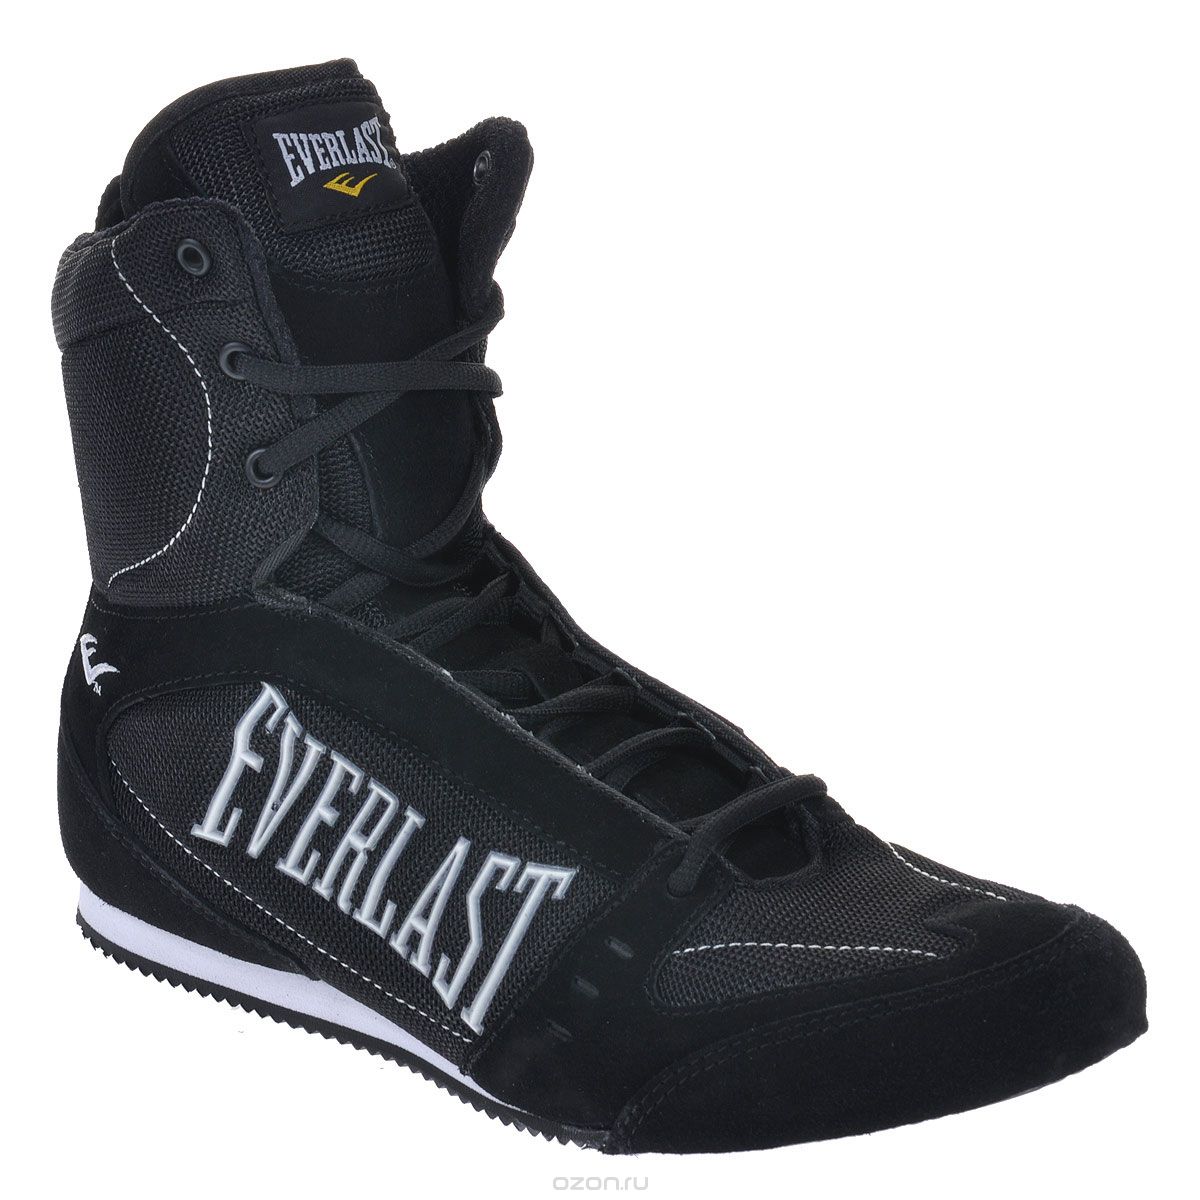  Everlast High-Top Competition,  11 (RUS 43,5), : . 527 11 BK